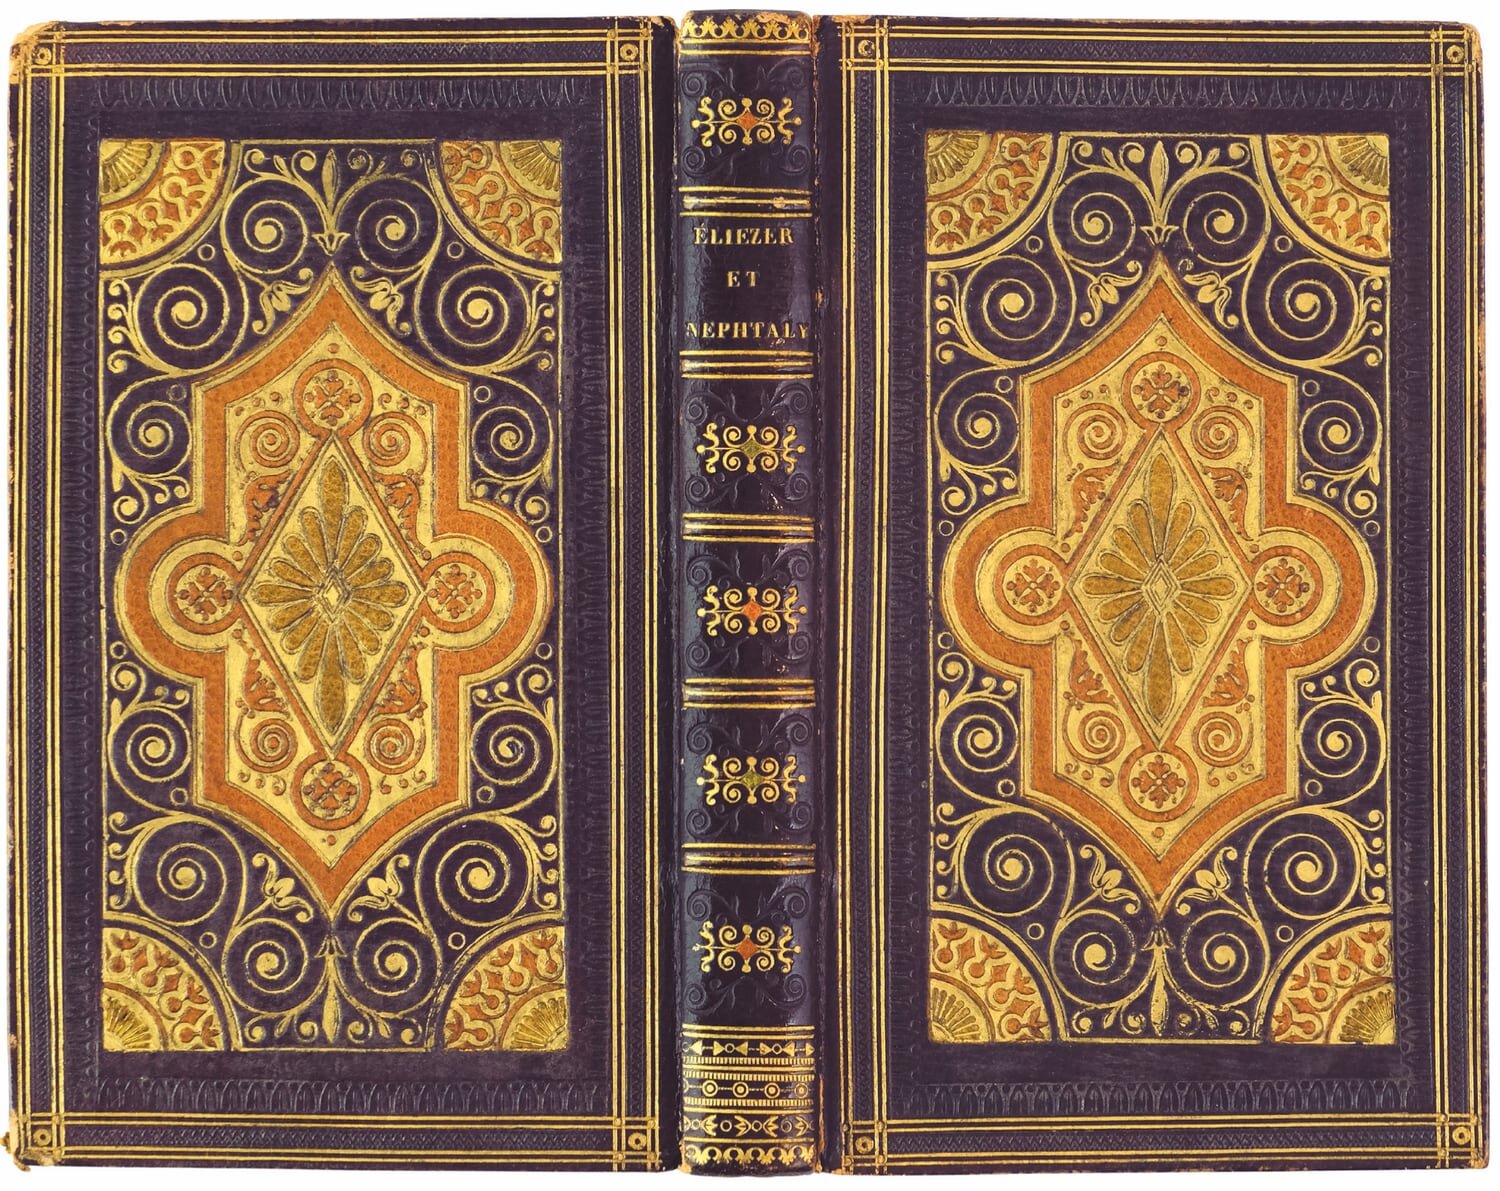  Mosaic binding by Jean Badiéjous for Goethe’s  Werther  edition from 1825 [no. 261], and an unsigned mosaic binding for Florian’s  Éliezer et Nephtaly  [no. 200] 